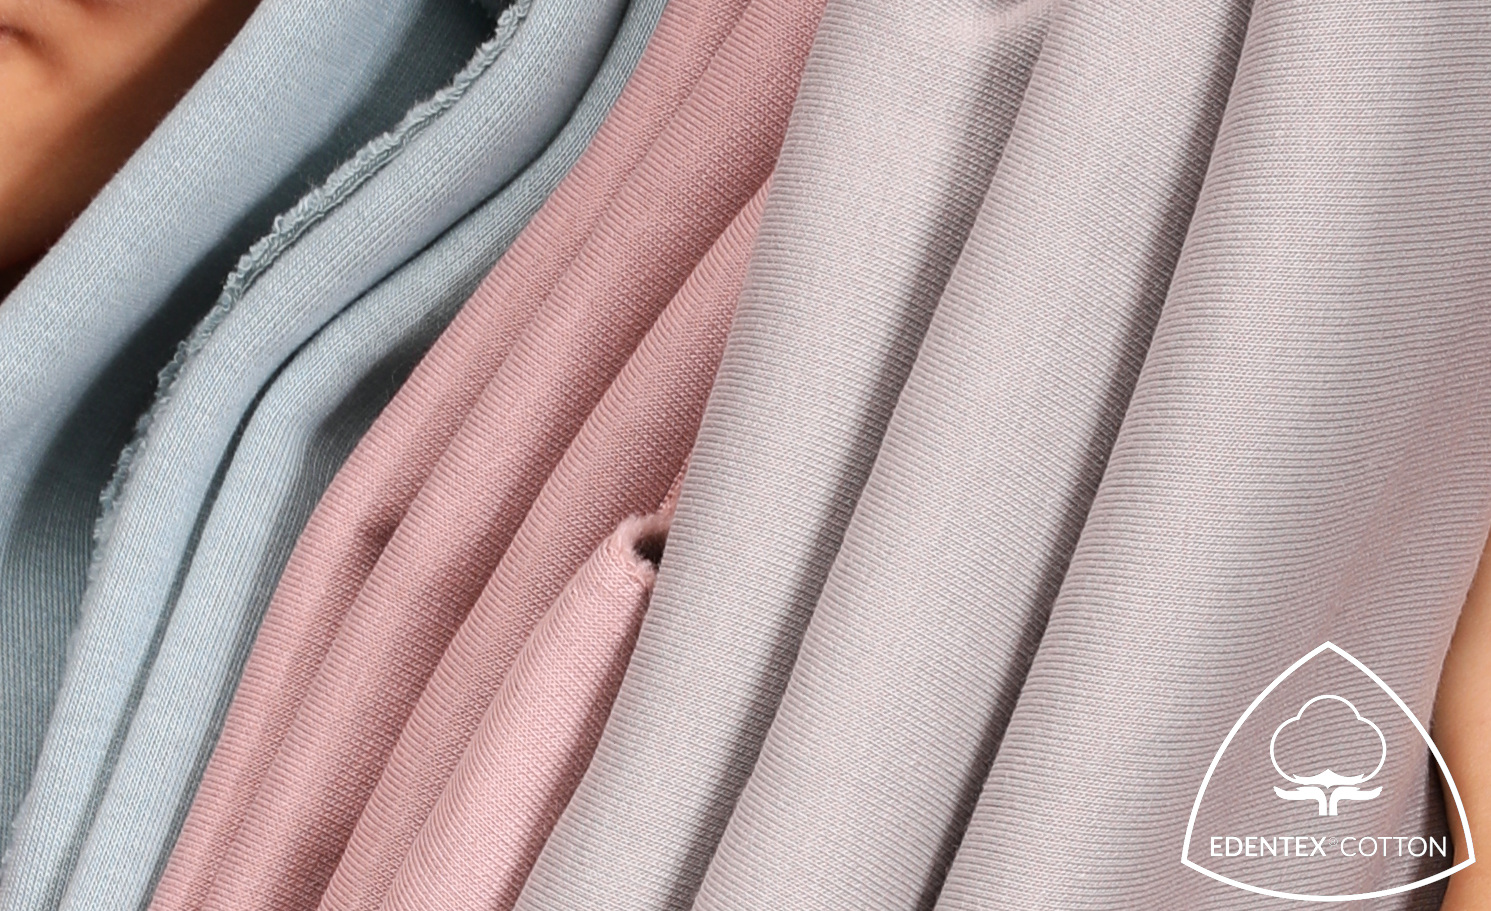 We create EDENTEX® cotton jersey fabrics for nature lovers filled with respect for its power and beauty.